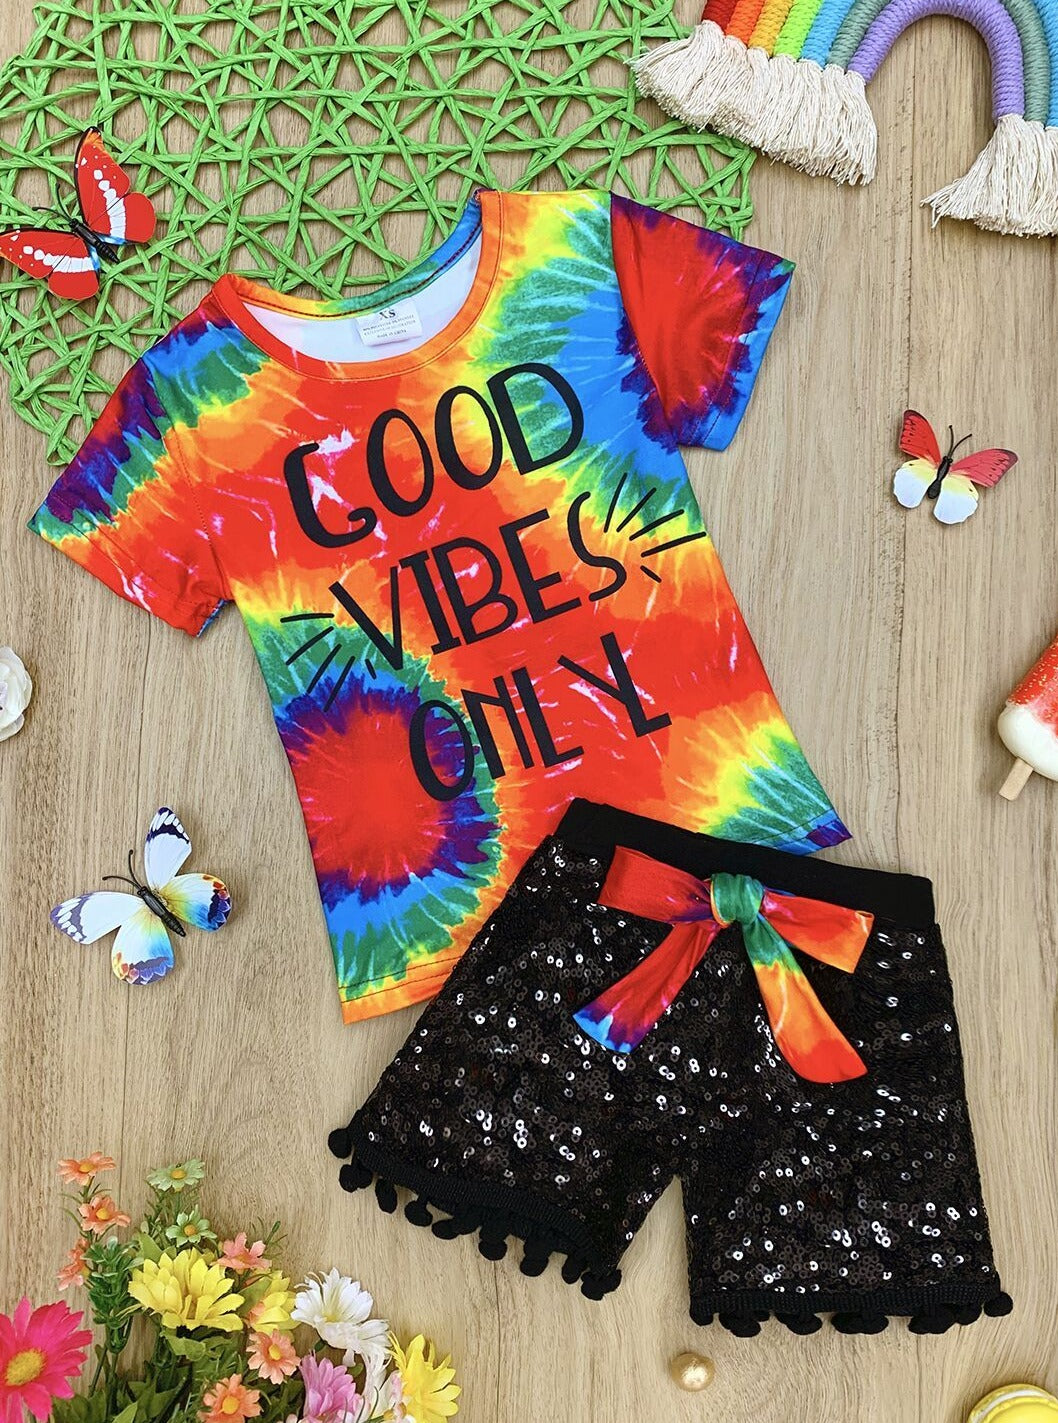 Girls "Good Vibes Online" Tie Dye Top and Bow Sequin Short Set